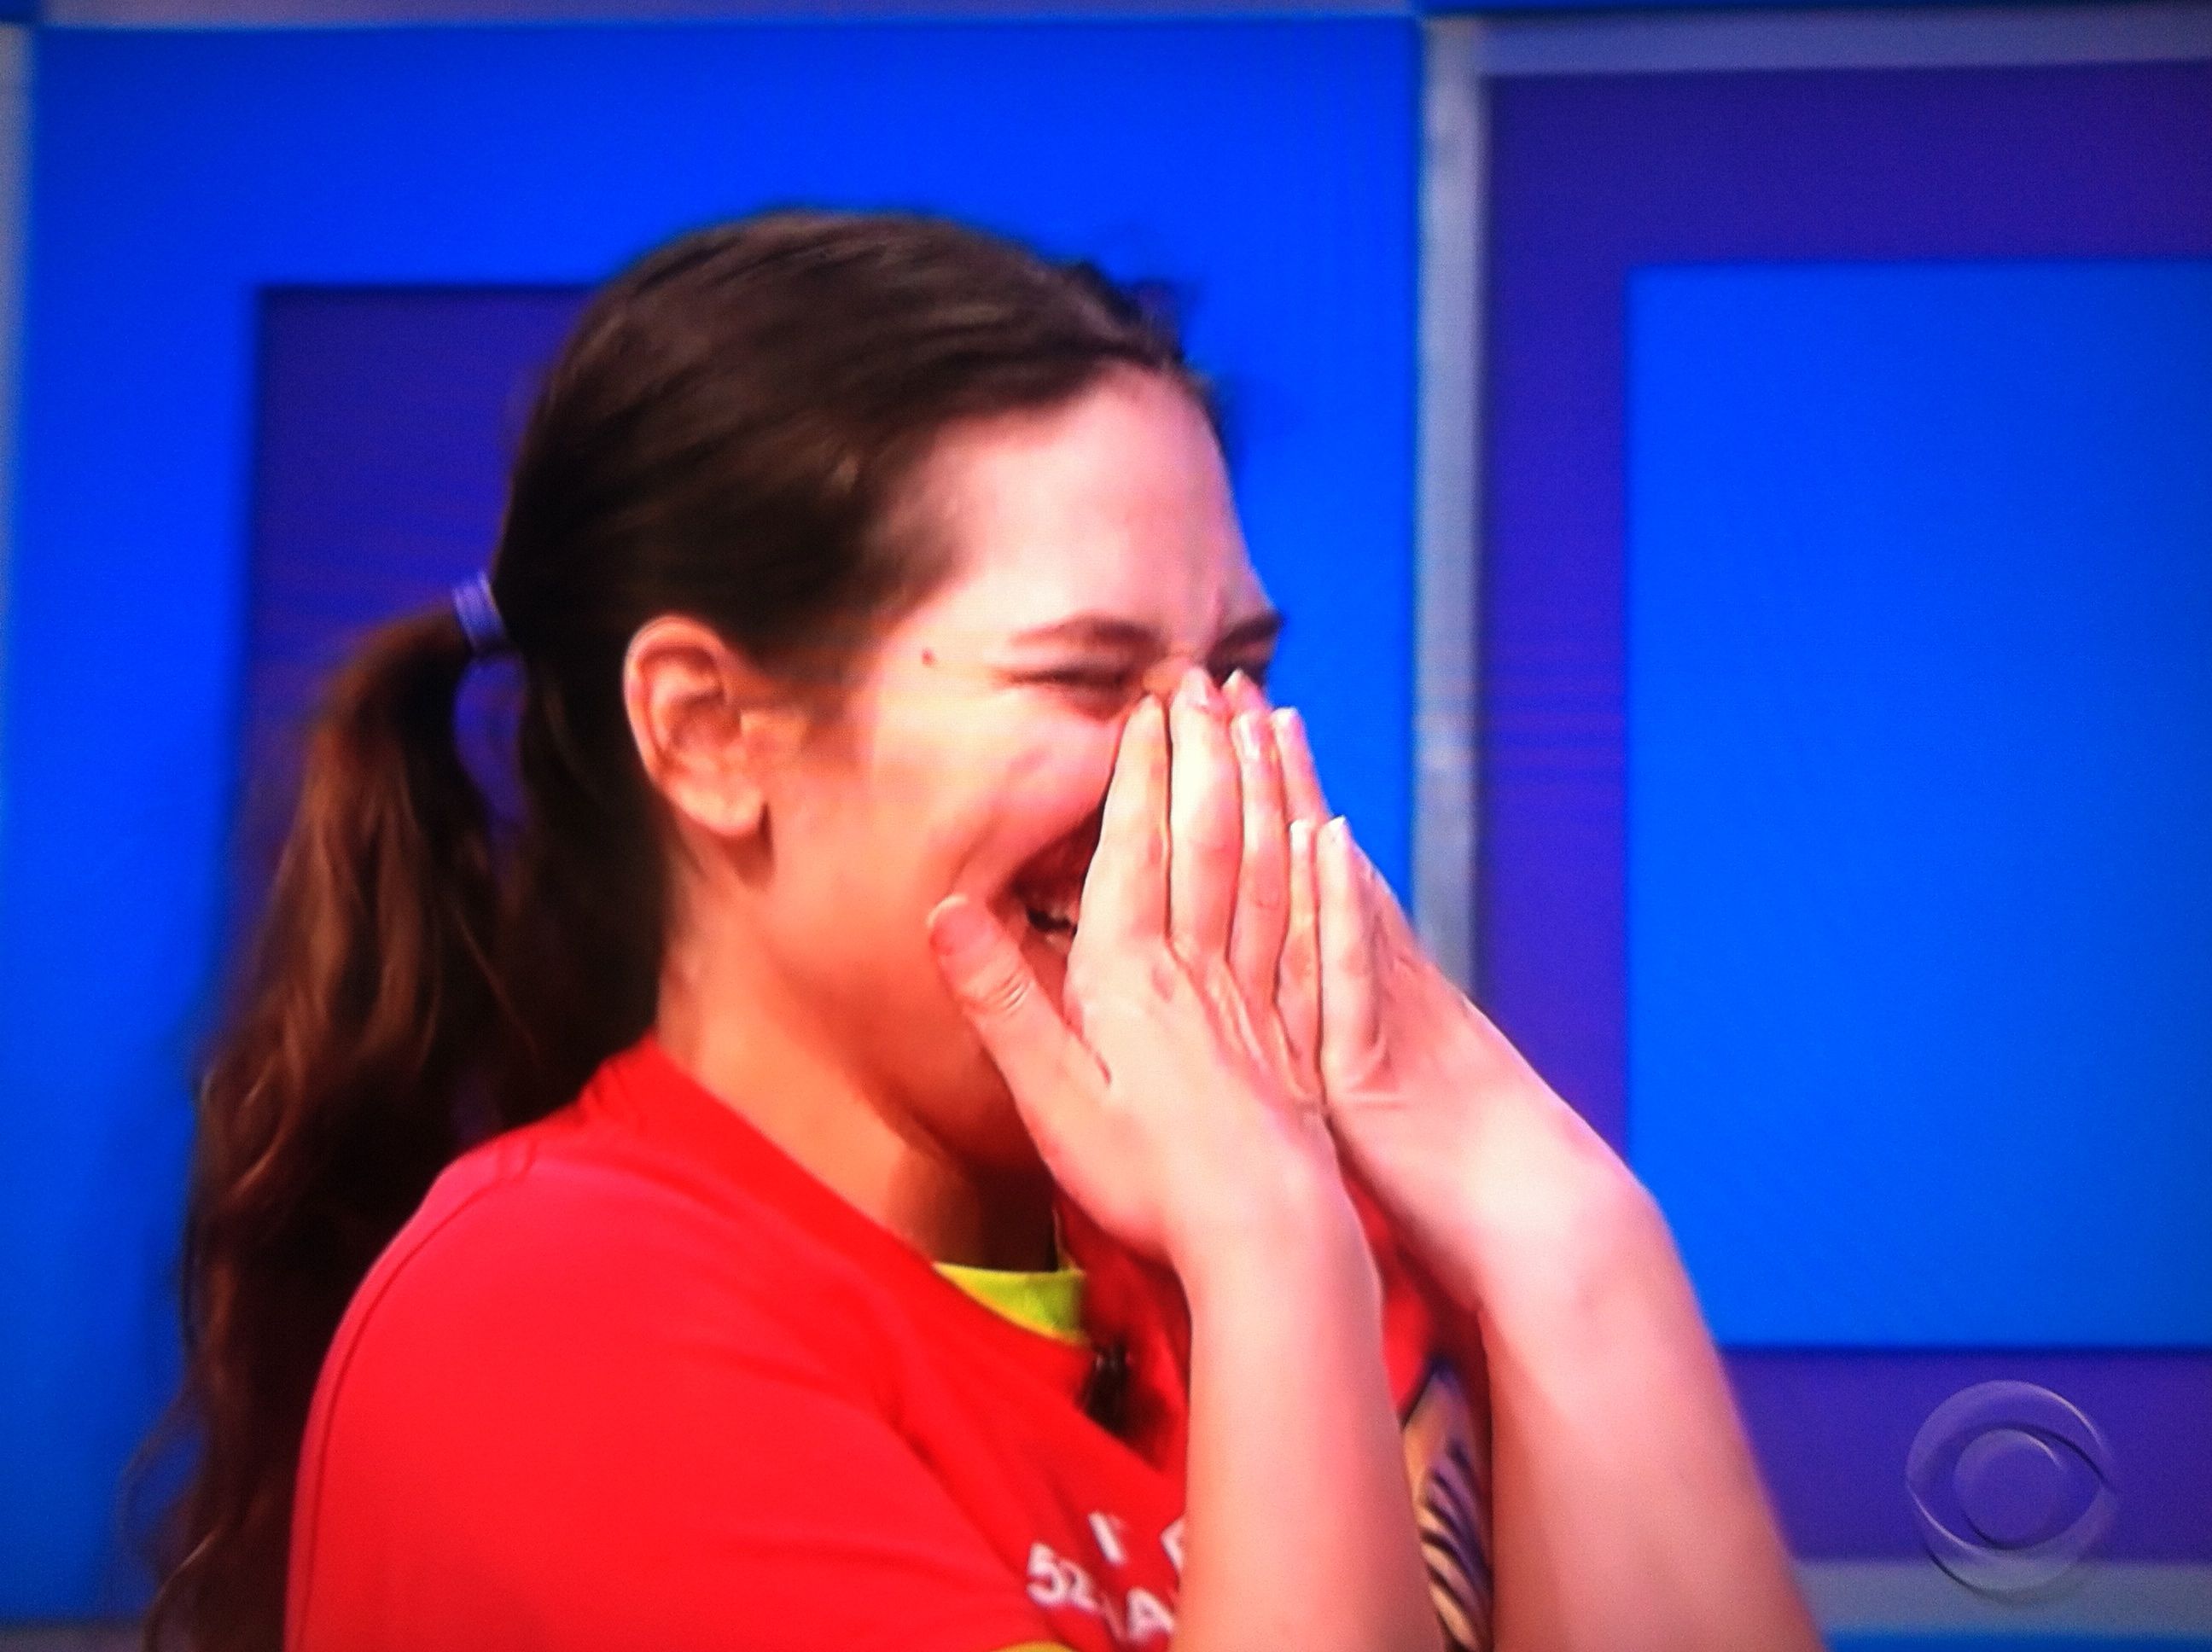 Aurora De Lucia with a huge smile/laugh as Drew Carey makes fun of her on the Price is Right